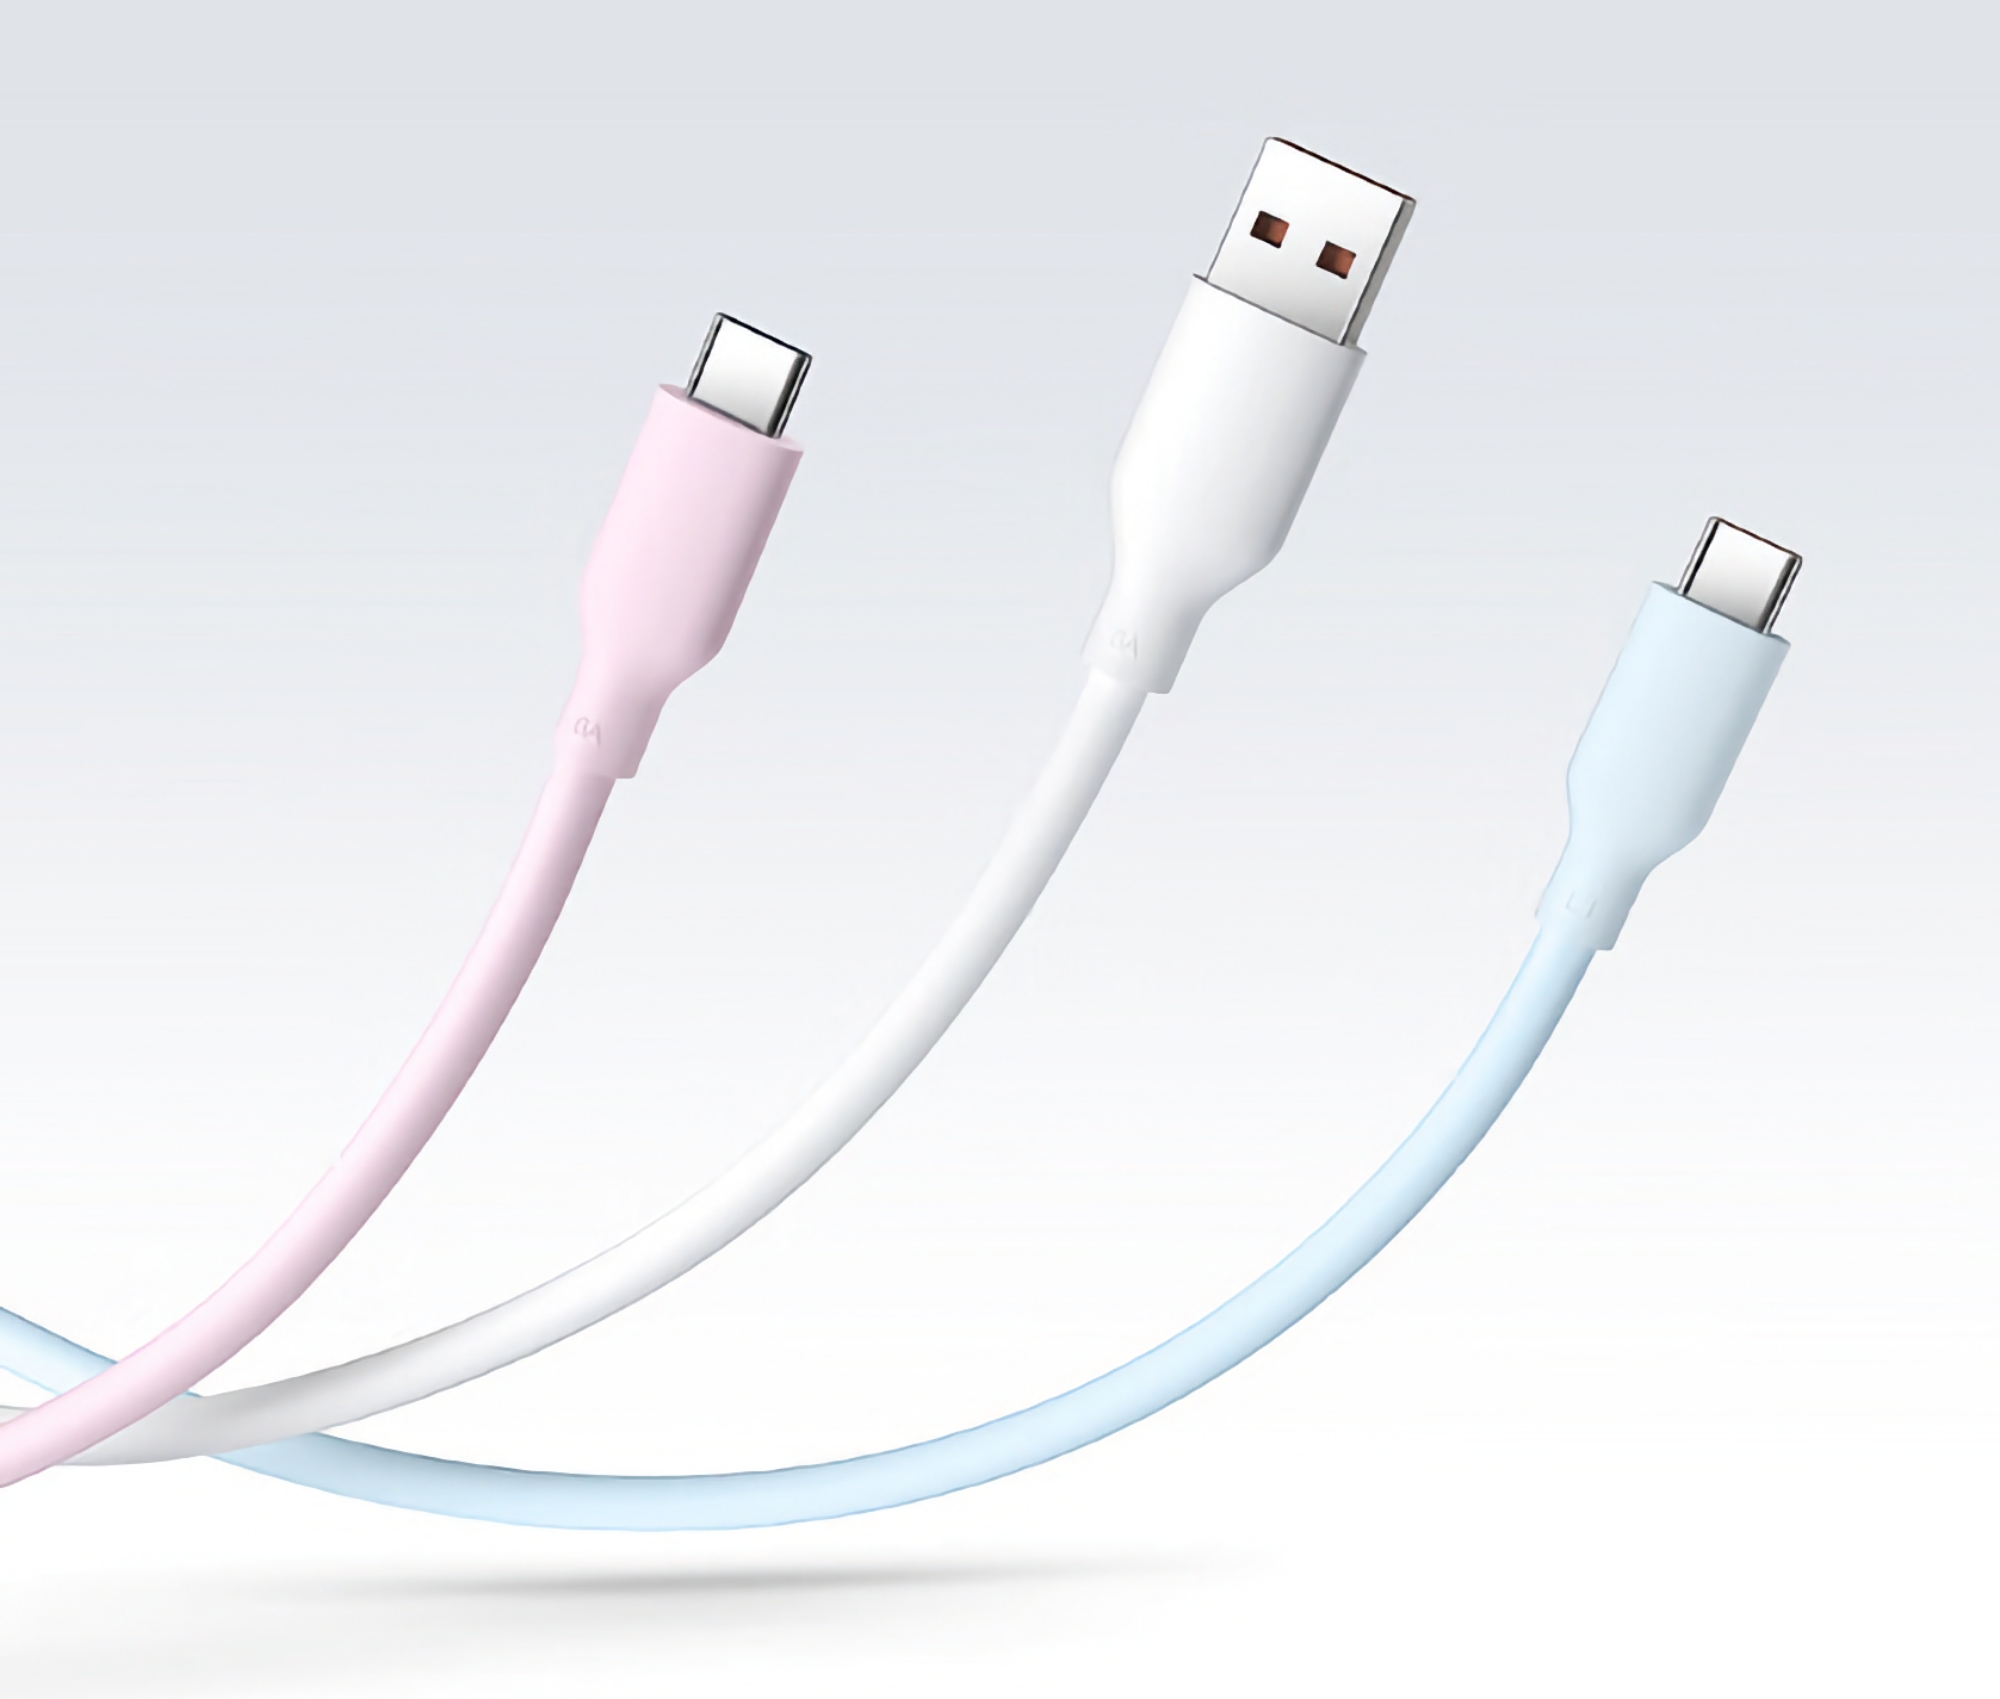 Xiaomi has launched a 2-metre USB-A to USB-C silicone cable with 120W charging support